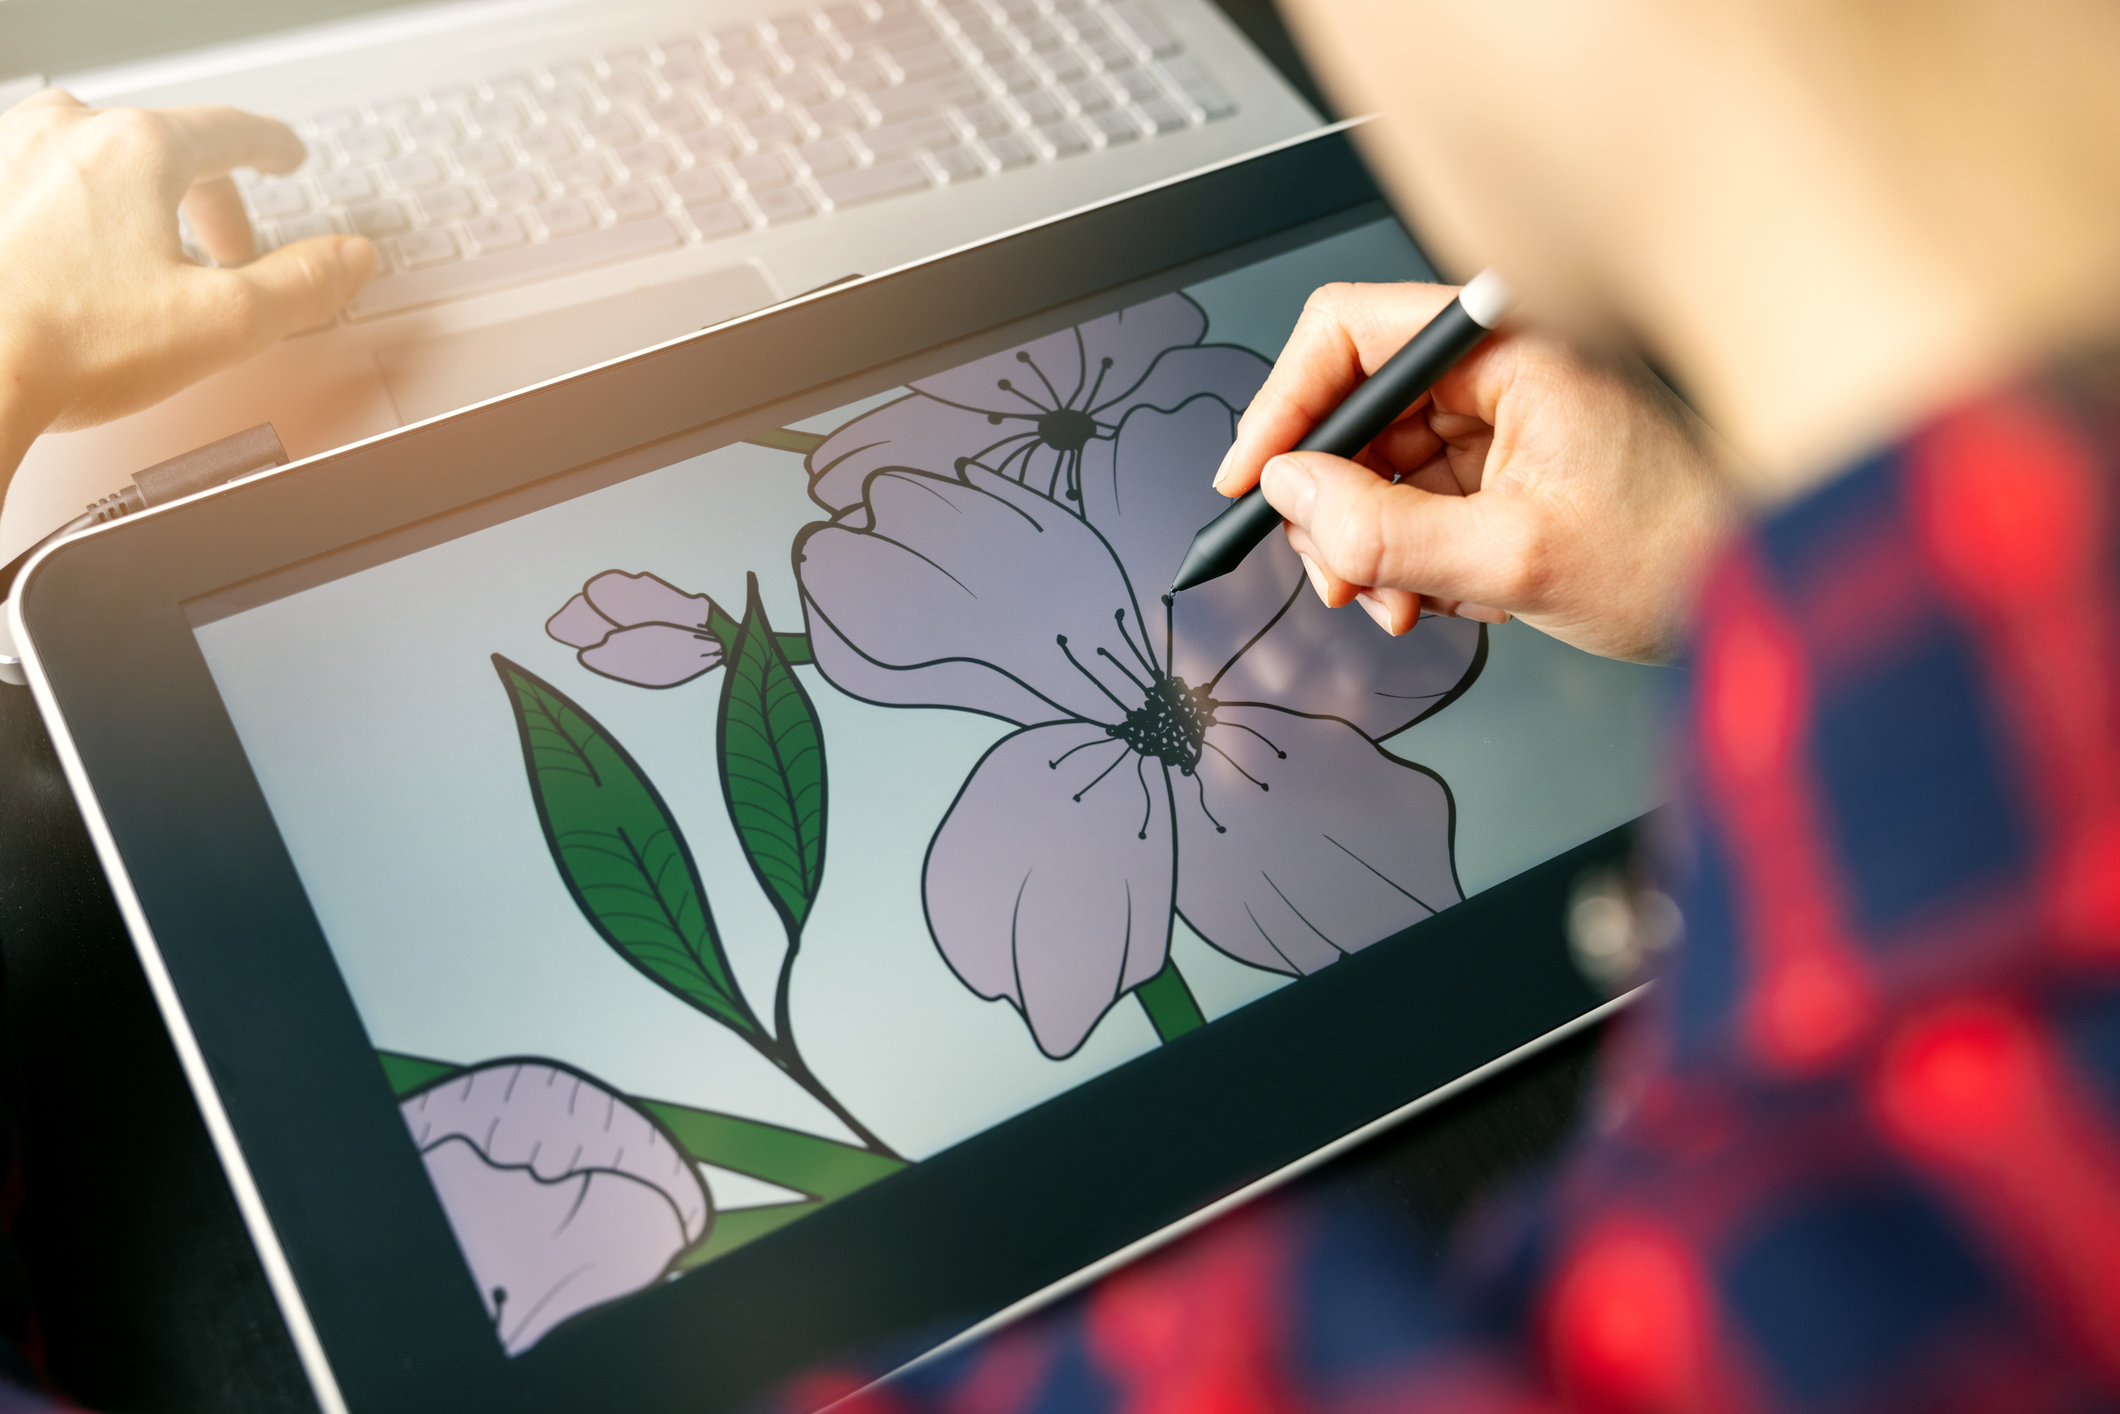 Over the shoulder of a male digital artist as he sketches flowers on a digital sketch pad hooked up to his computer.